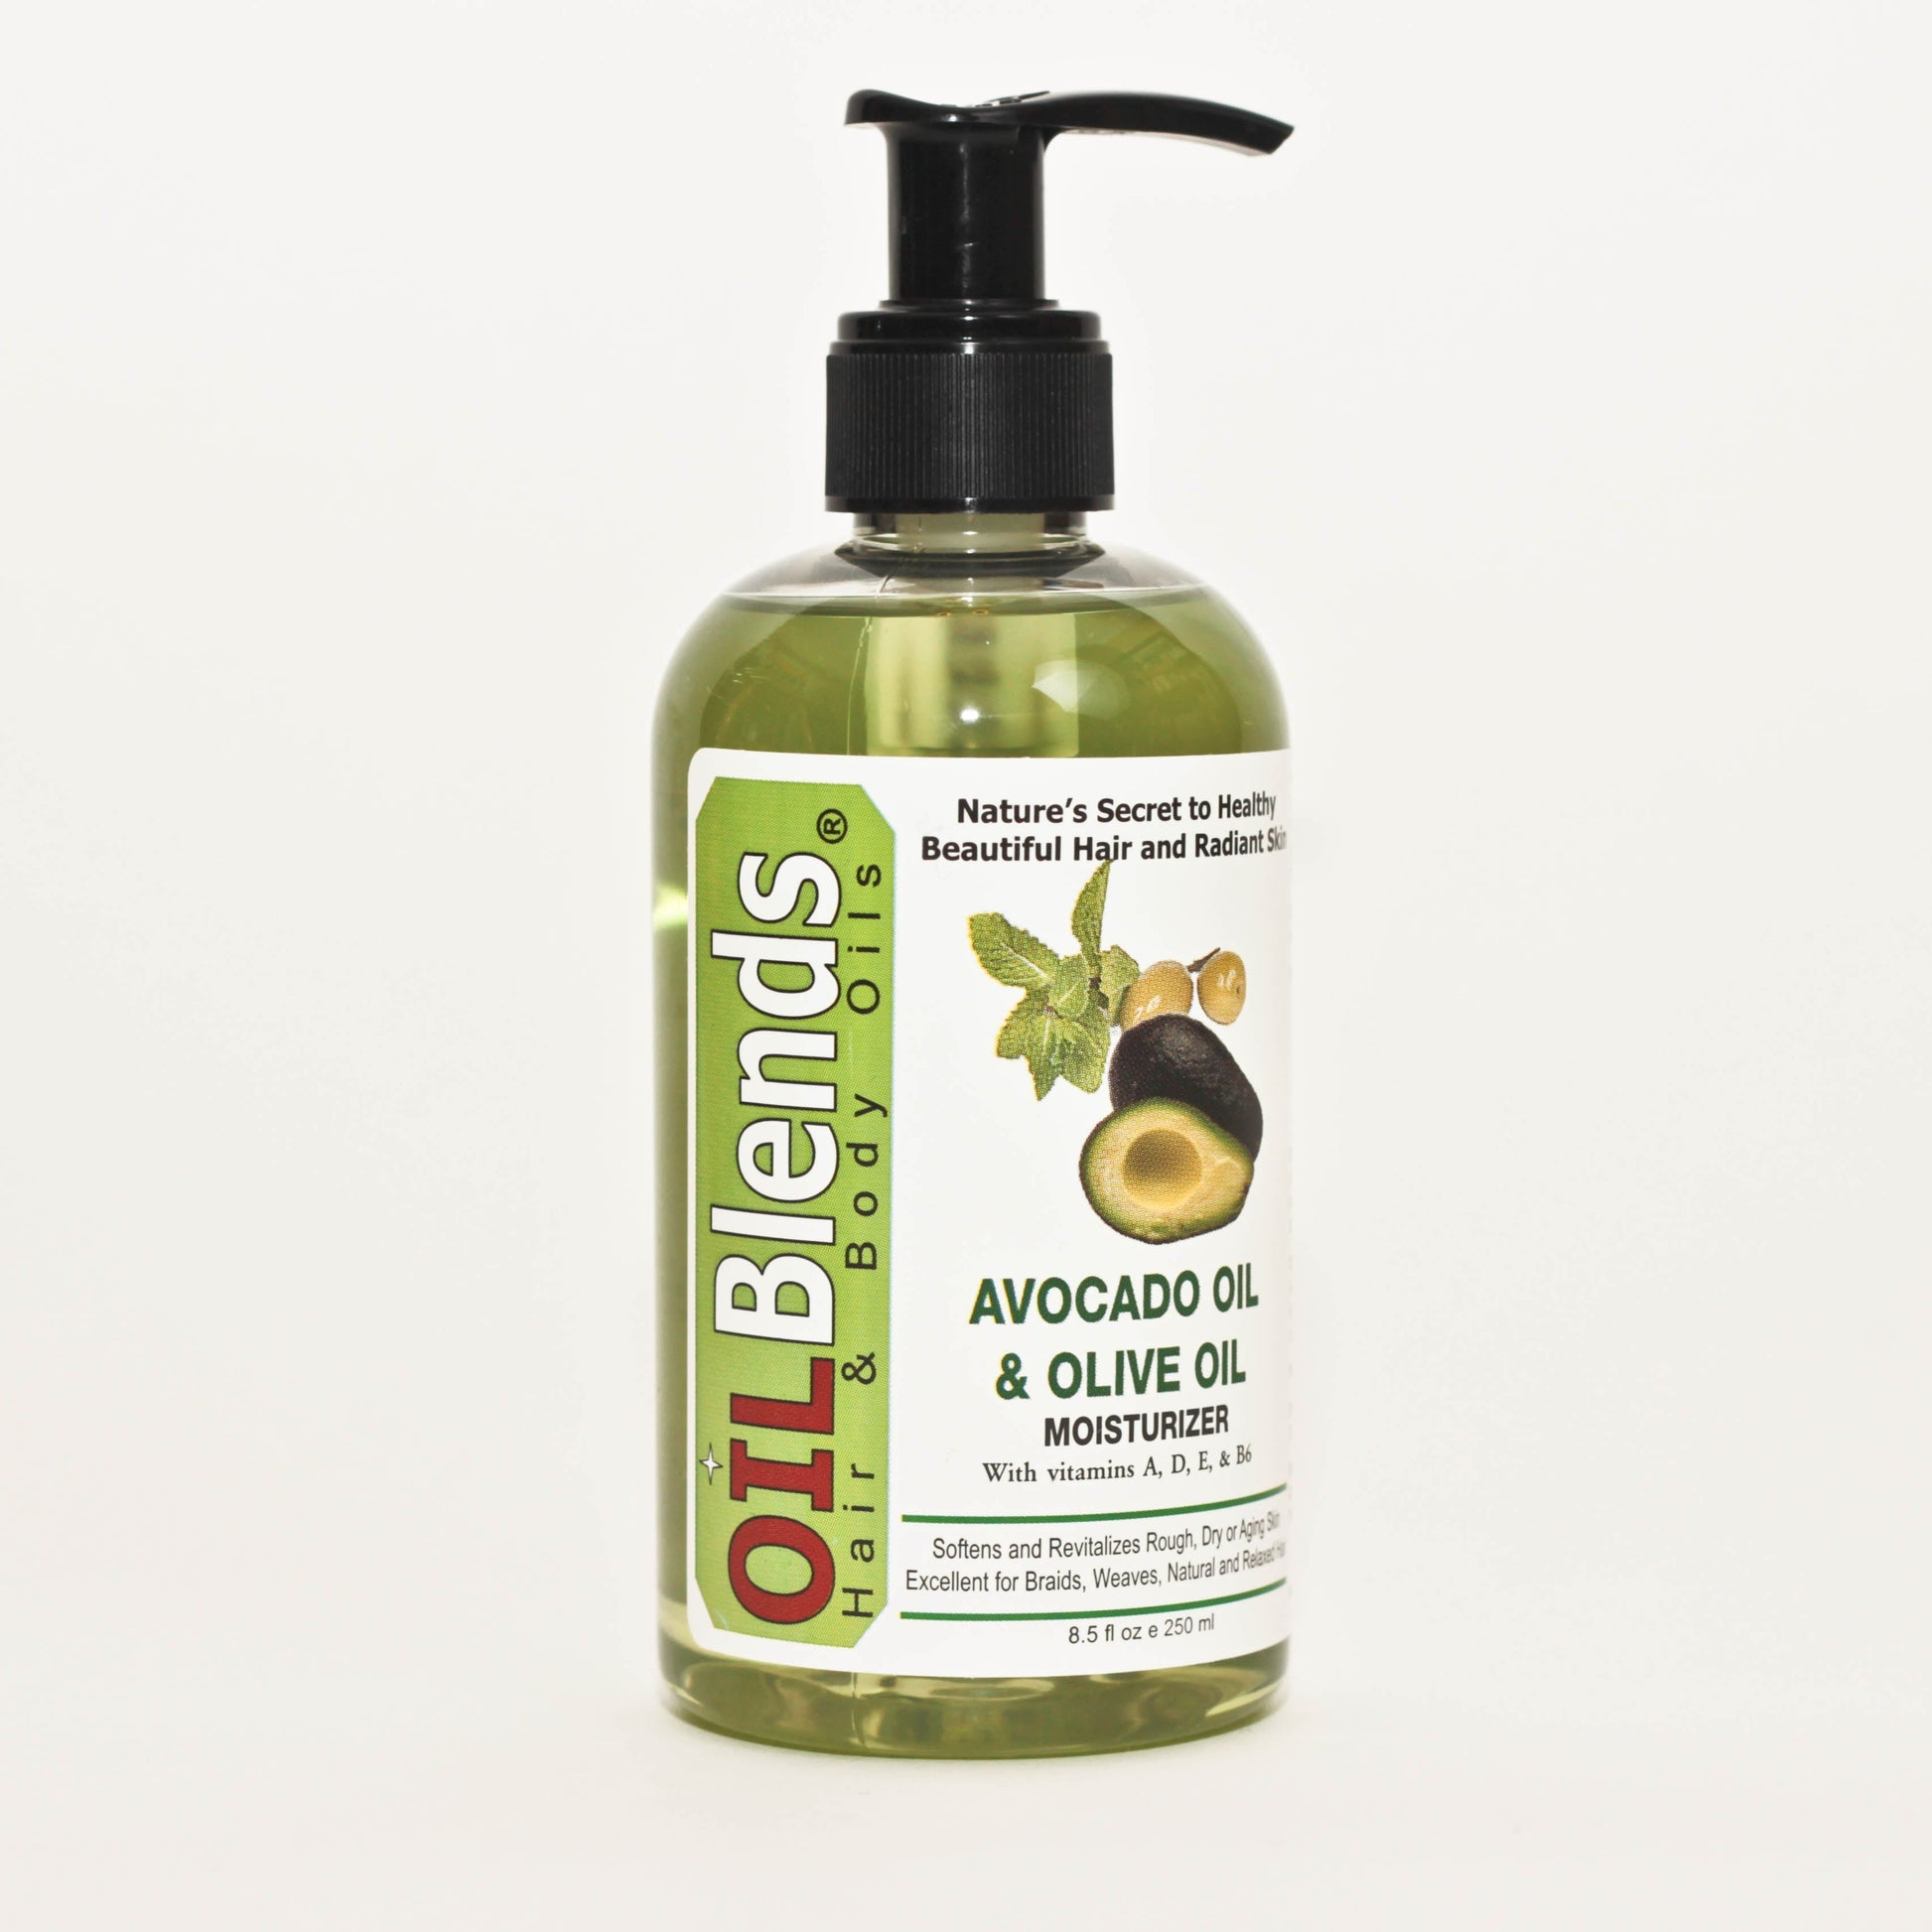 avocado and olive oil, oilblends, oil blends, body moisturizer, mature, sensitive or troubled skin, natural ingredients, hair oil, daily moisturizer, soft skin, healthy skin,avocado and olive oil, oilblends, oil blends, body moisturizer, mature, sensitive or troubled skin, natural ingredients, hair oil.plant-based ingredients,organic,natural preoducts,for mature and sensitive skin,vegan friendly,cruelty free